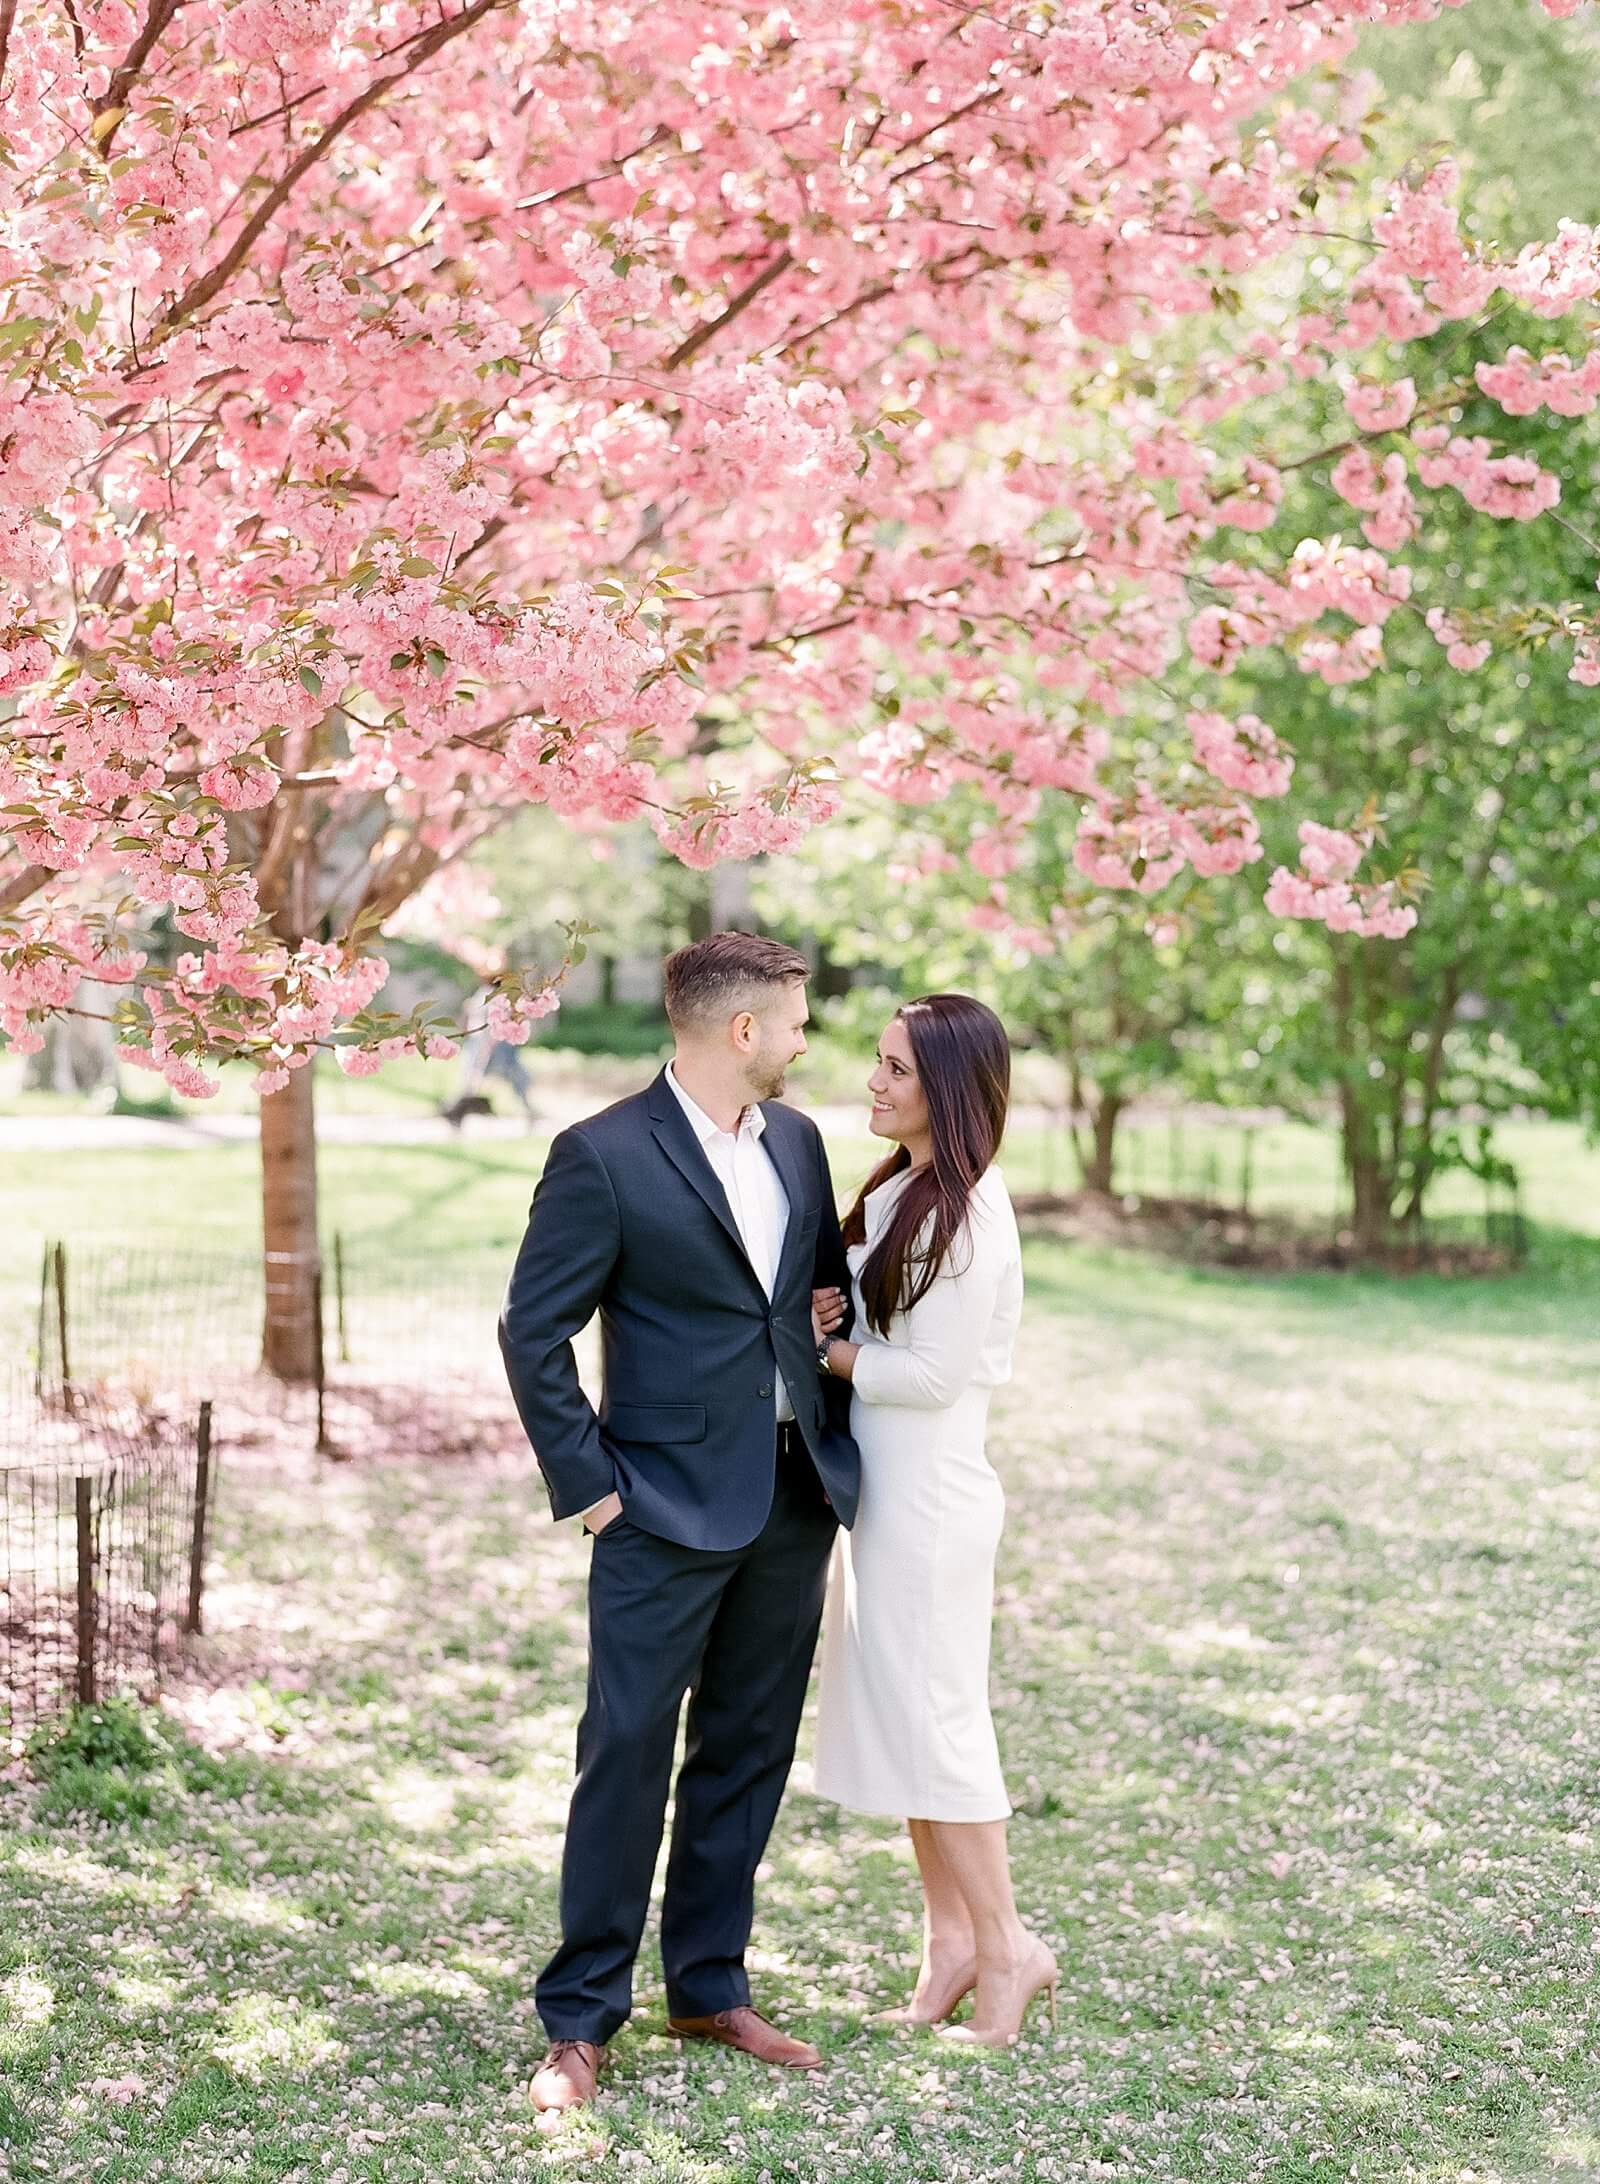 A couple under the cherry blossoms during their engagement session in Central Park in Manhattan.